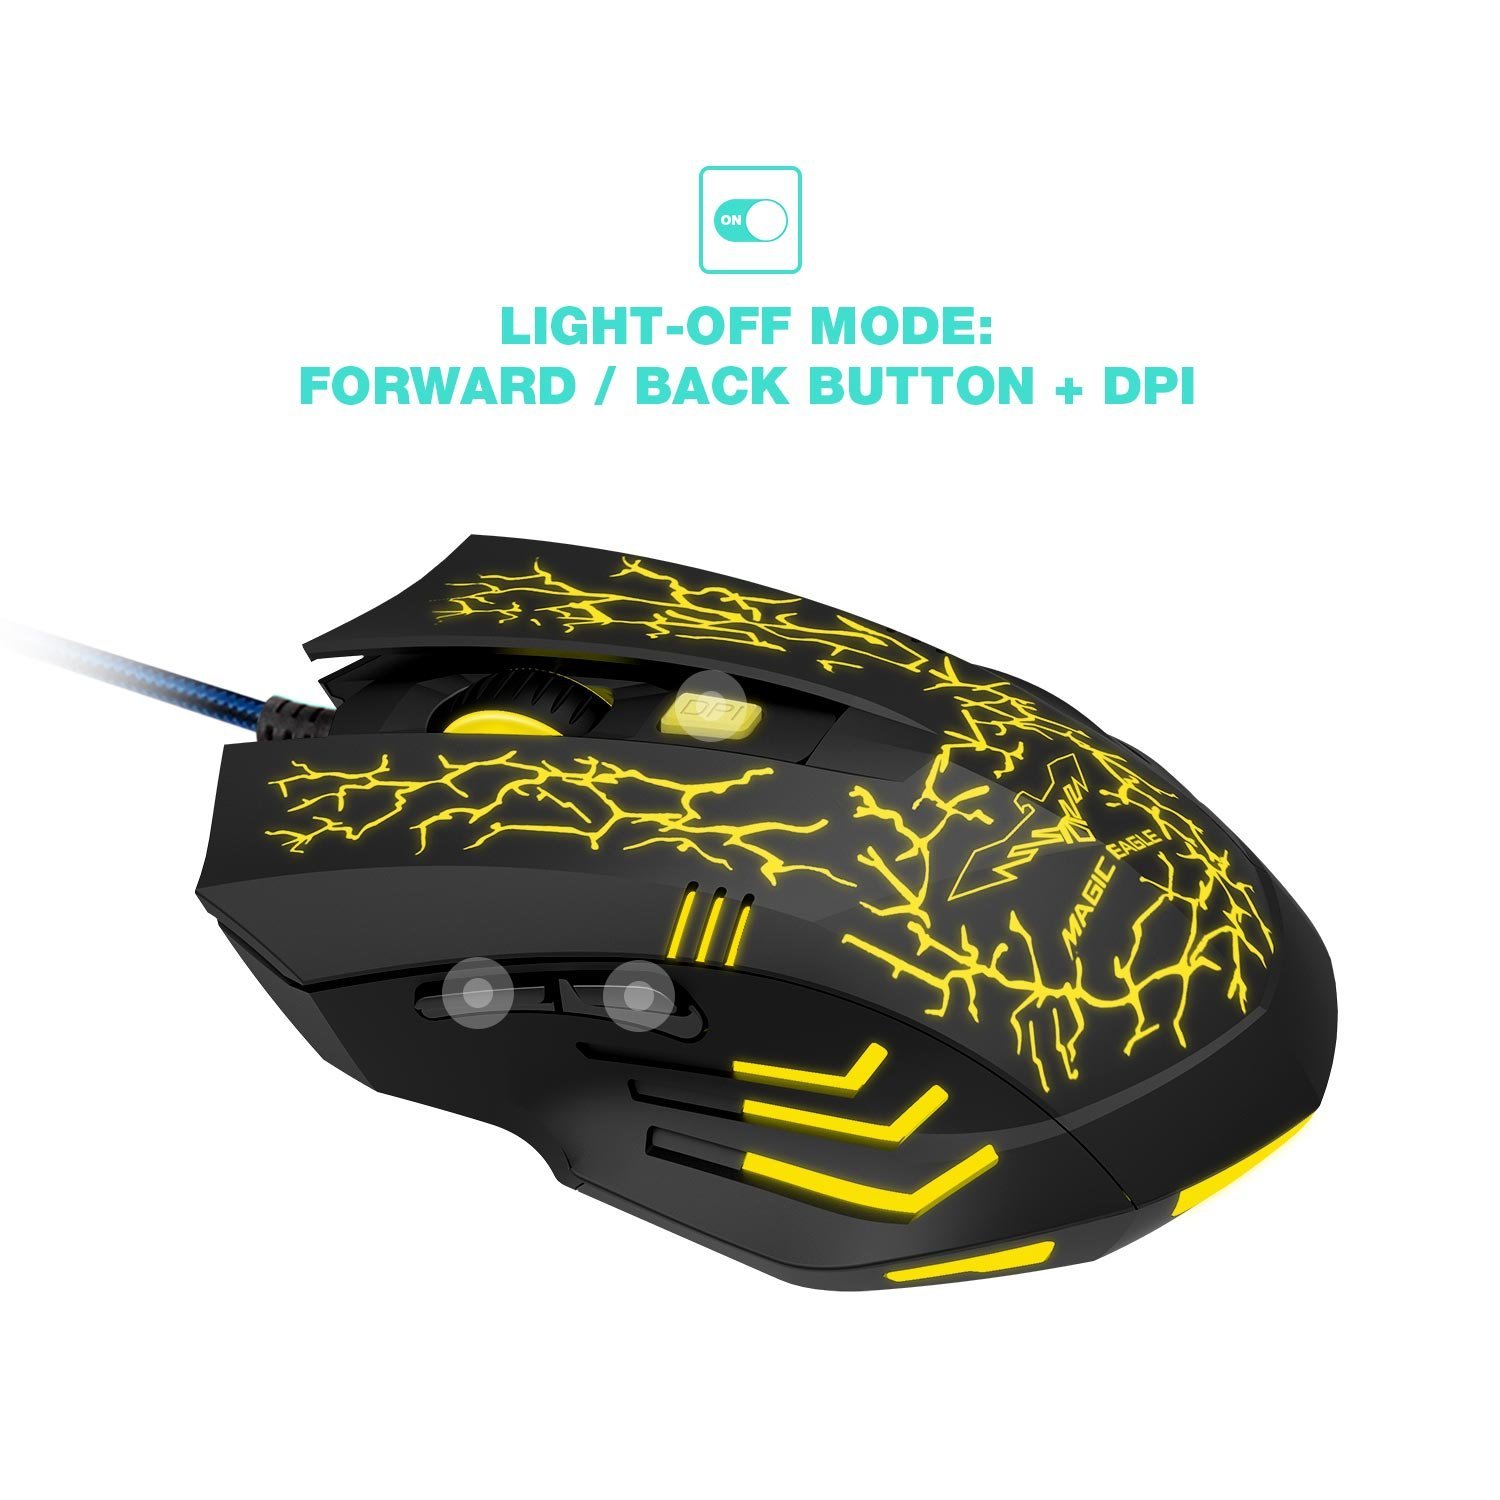 why is there a spine on the havit magic eagle gaming mouse